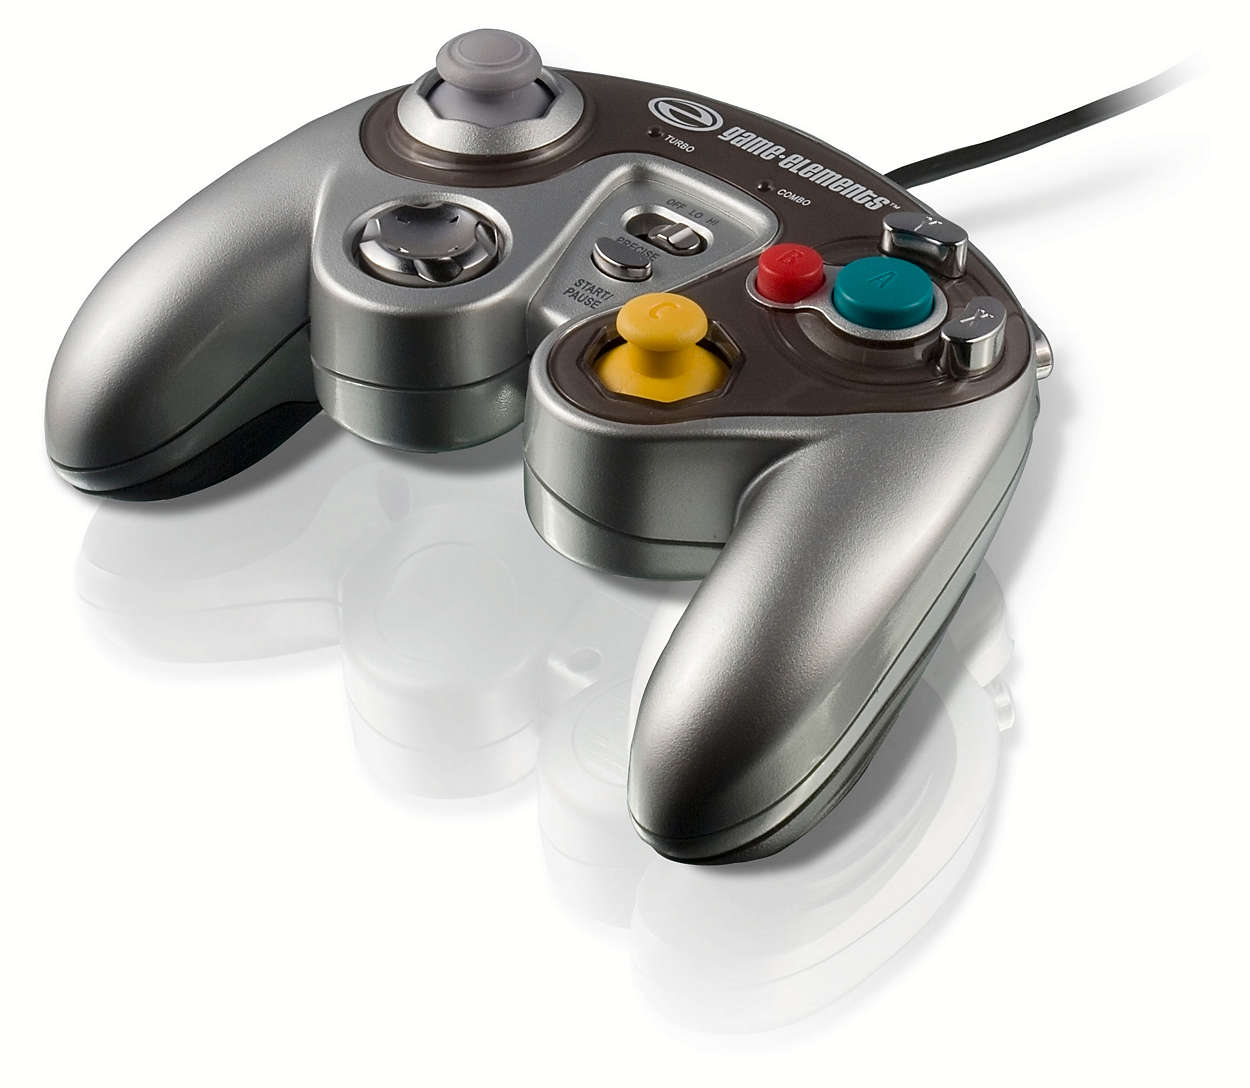 Improve your Gamecube experience